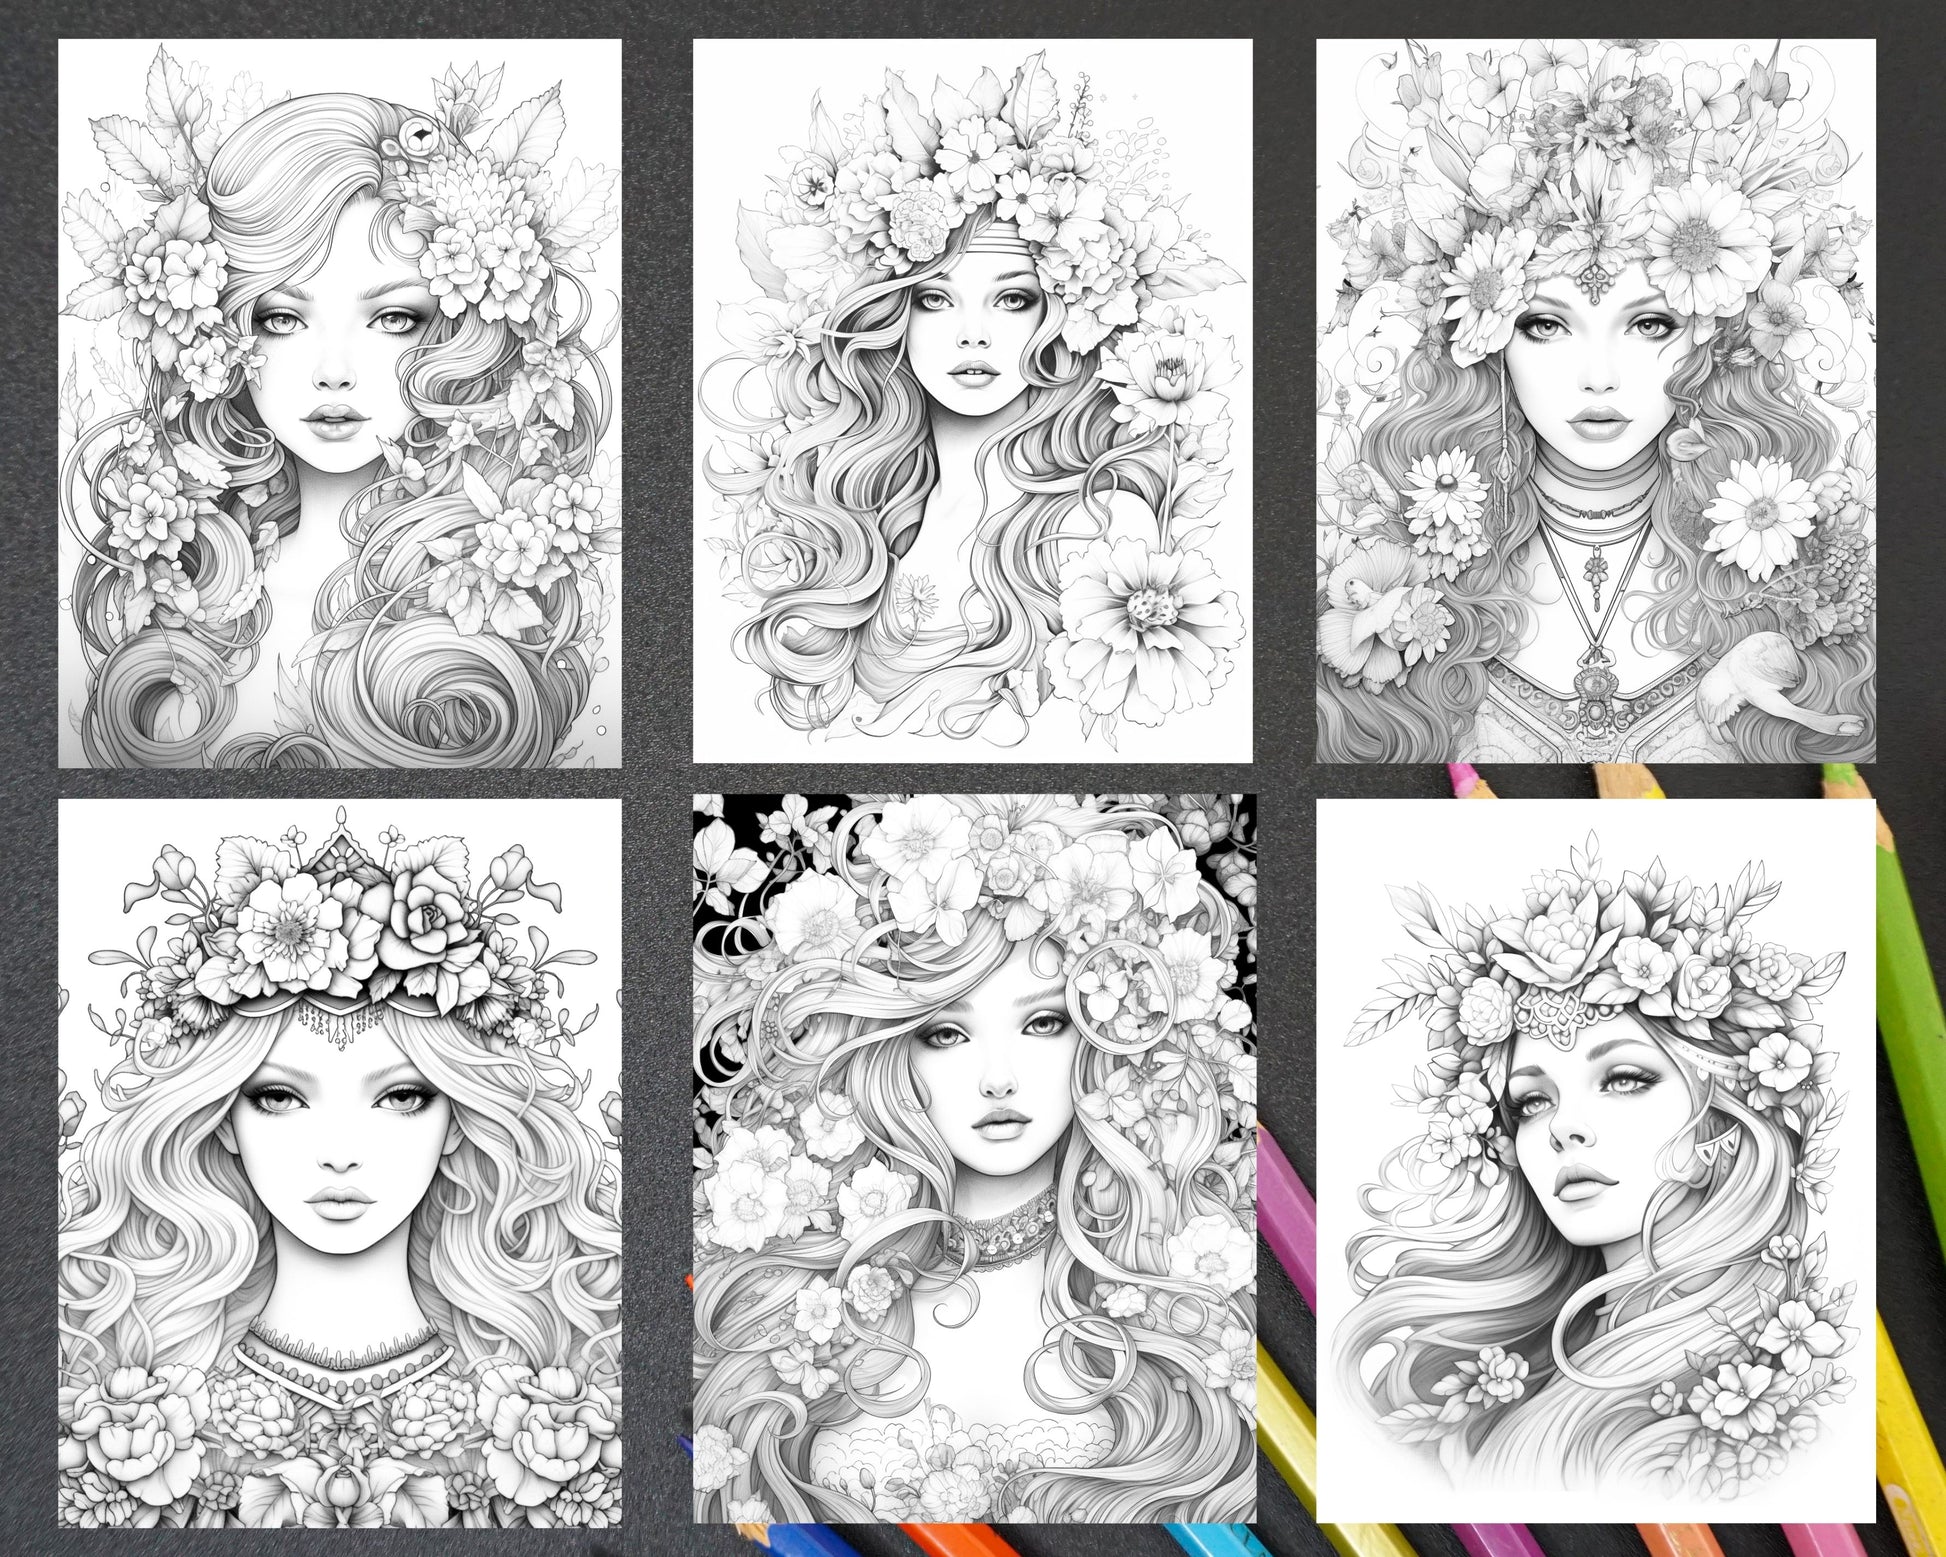 Flower Goddess Coloring Pages, Printable Coloring Pages, Adult Coloring Book, Mindfulness Coloring Pages, Stress Relief Coloring Pages, Art Therapy Coloring Pages